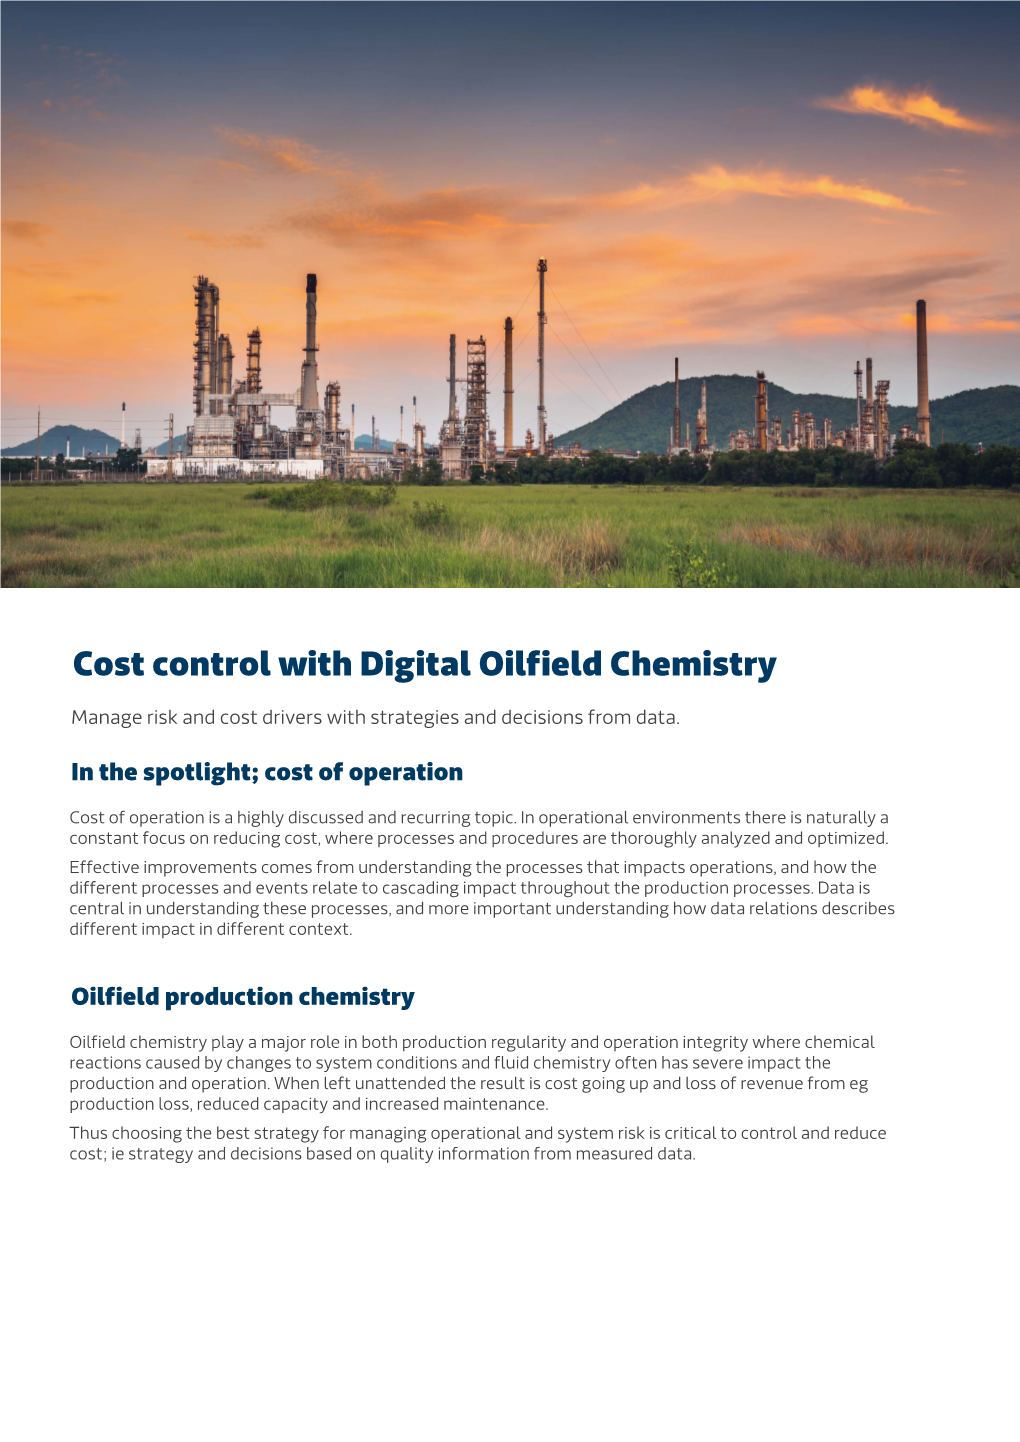 Cost Control with Digital Oilfield Chemistry